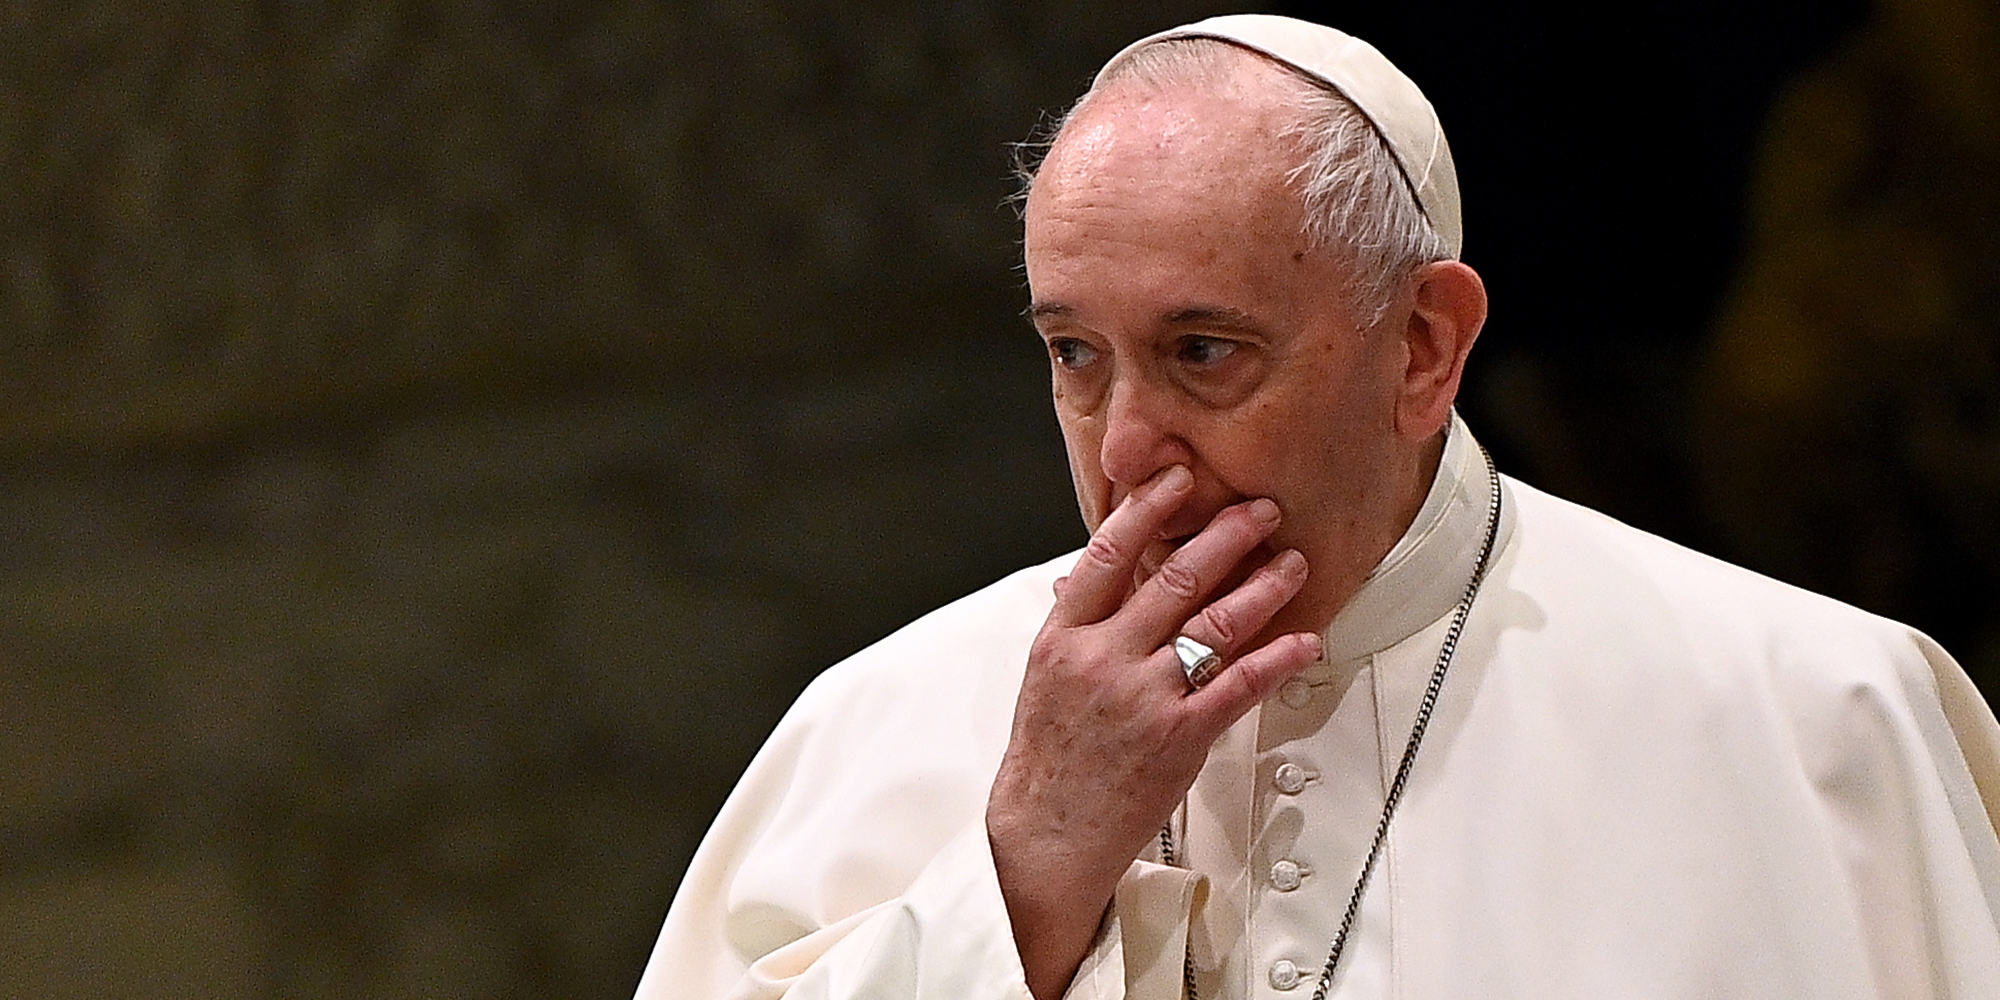 The Pope’s Instagram account in November liked a picture of scantily clad Brazilian model